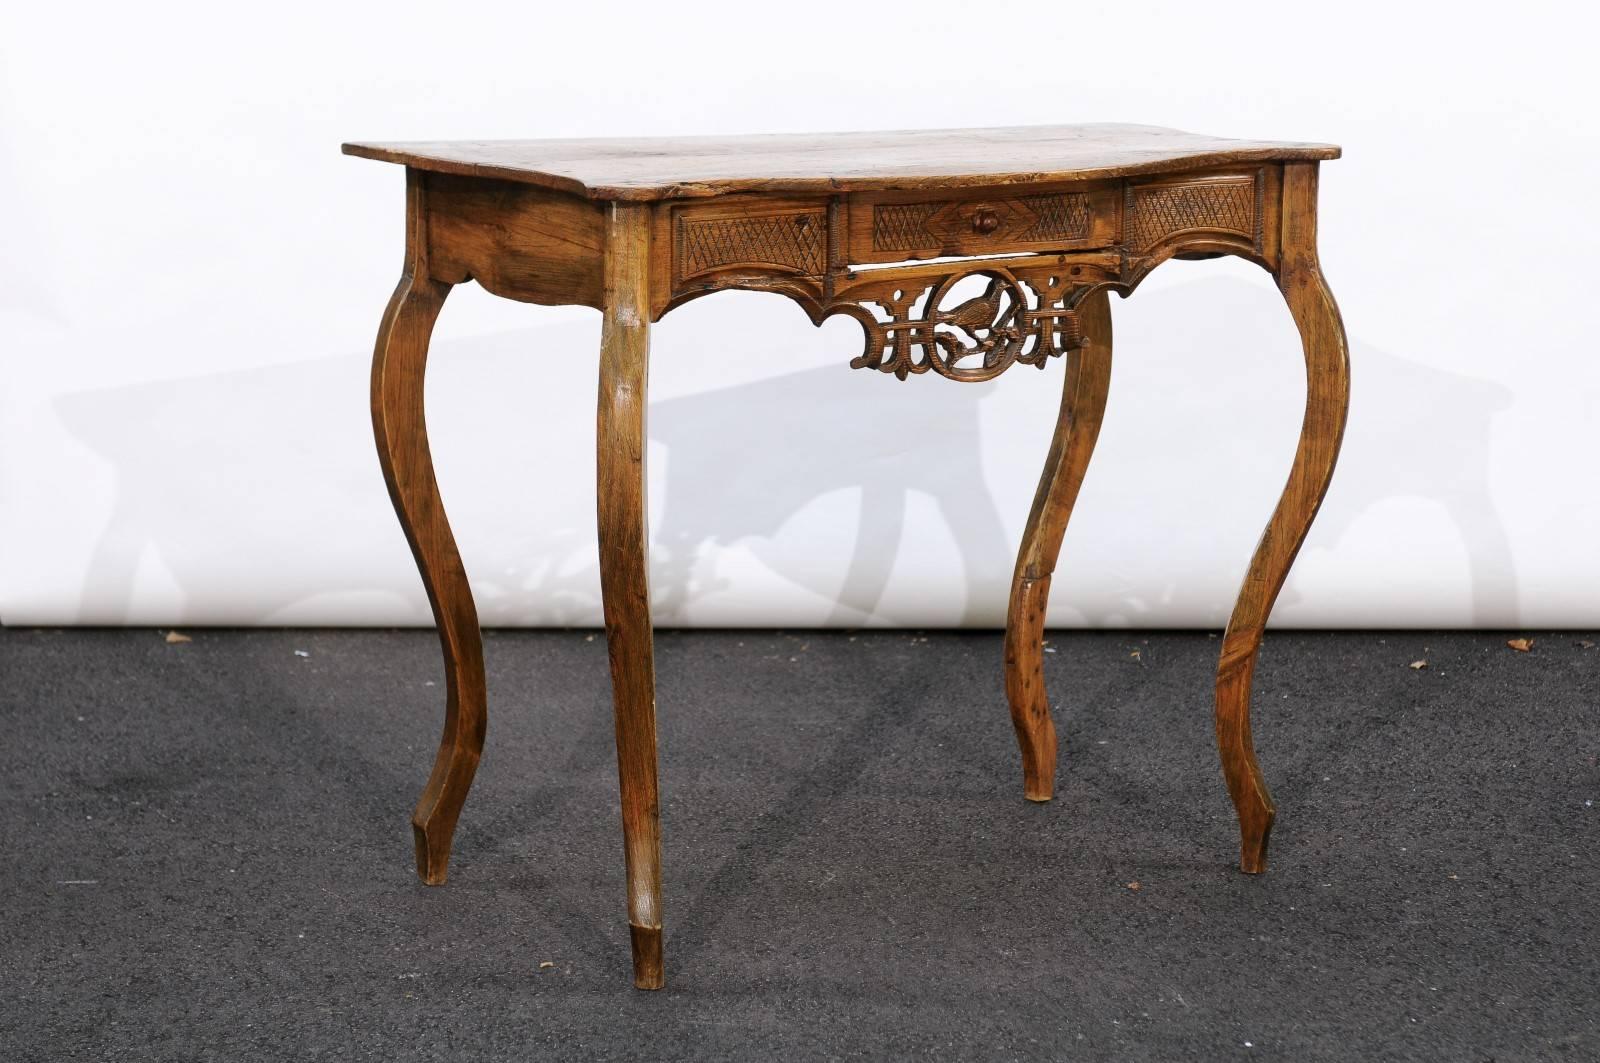 An exquisite French Louis XV style pine desk from the Jura region in Eastern France, bordering Switzerland. Look at those legs! And the intricate carving on the apron depicting a delicate bird in a carved medallion. Magnifique! Finding unique pieces